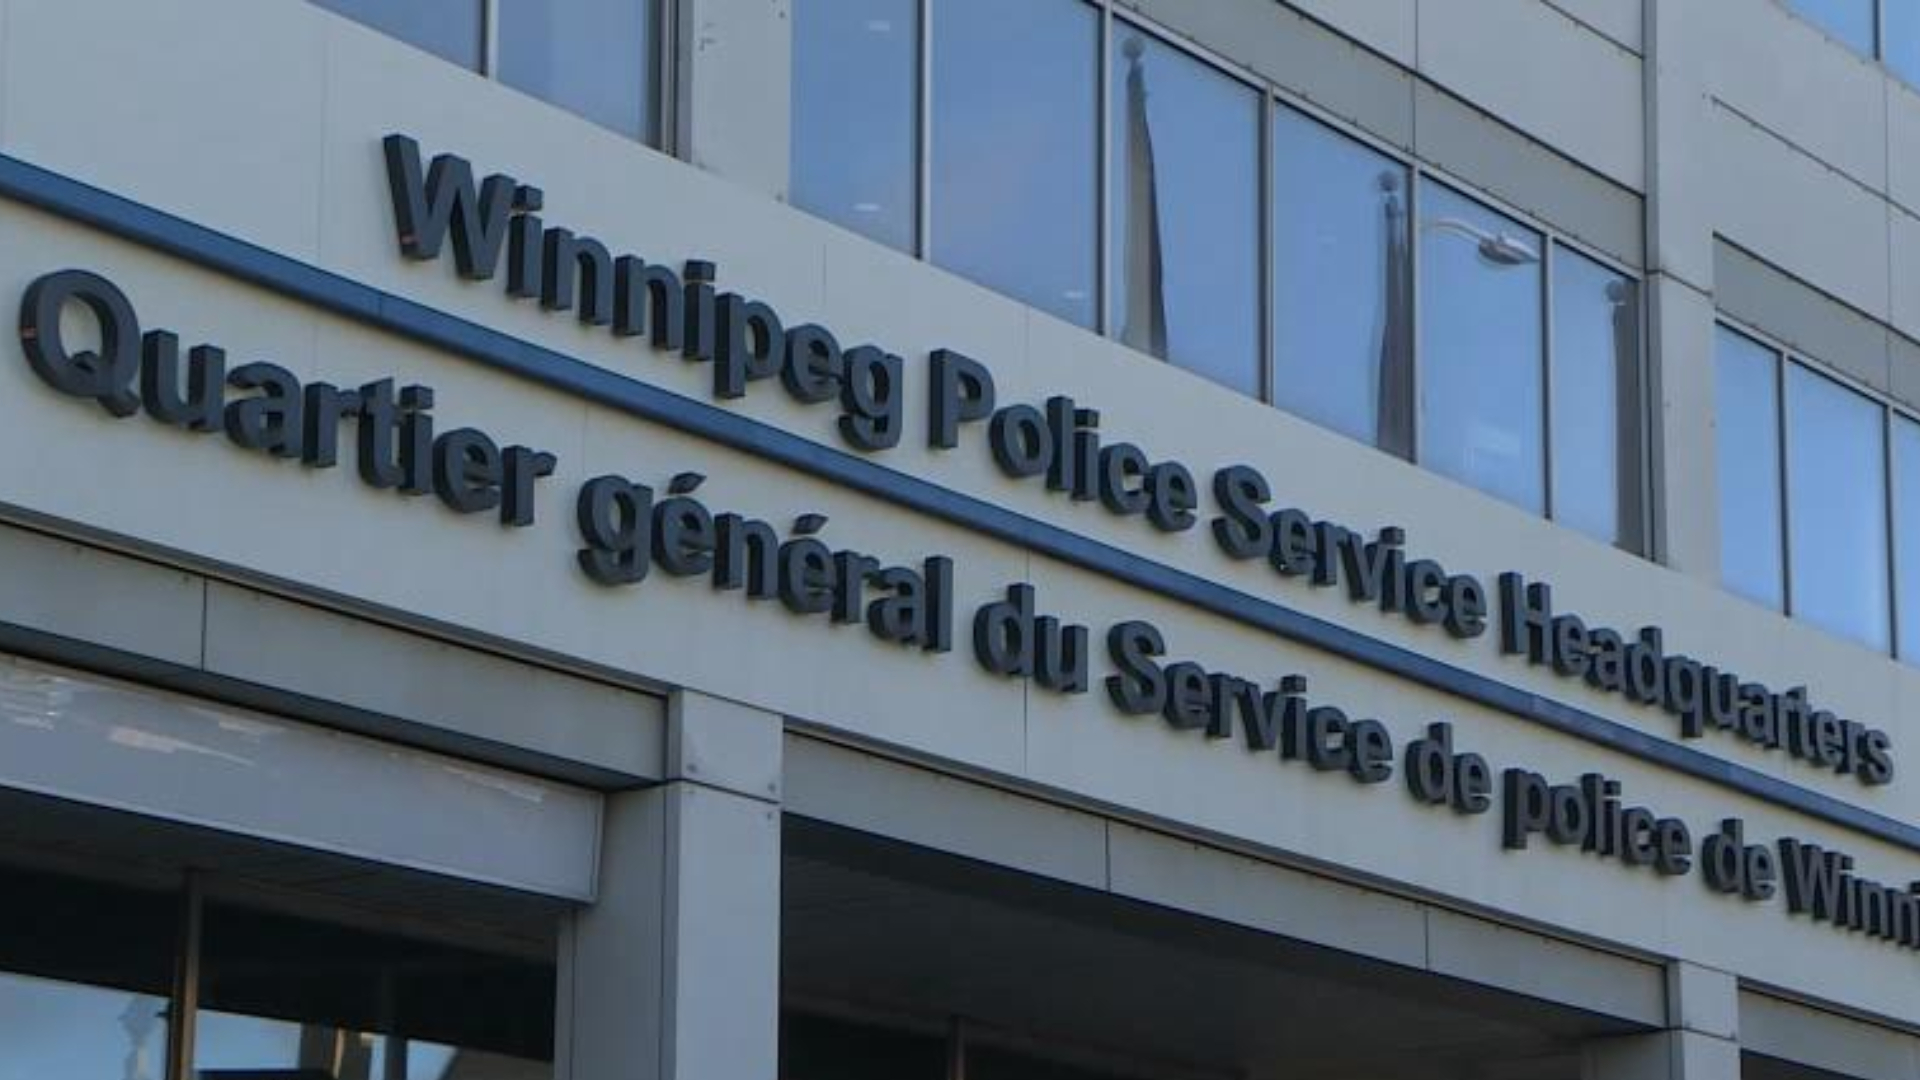 Family hopes inquest into deaths results in change of policy at Winnipeg police